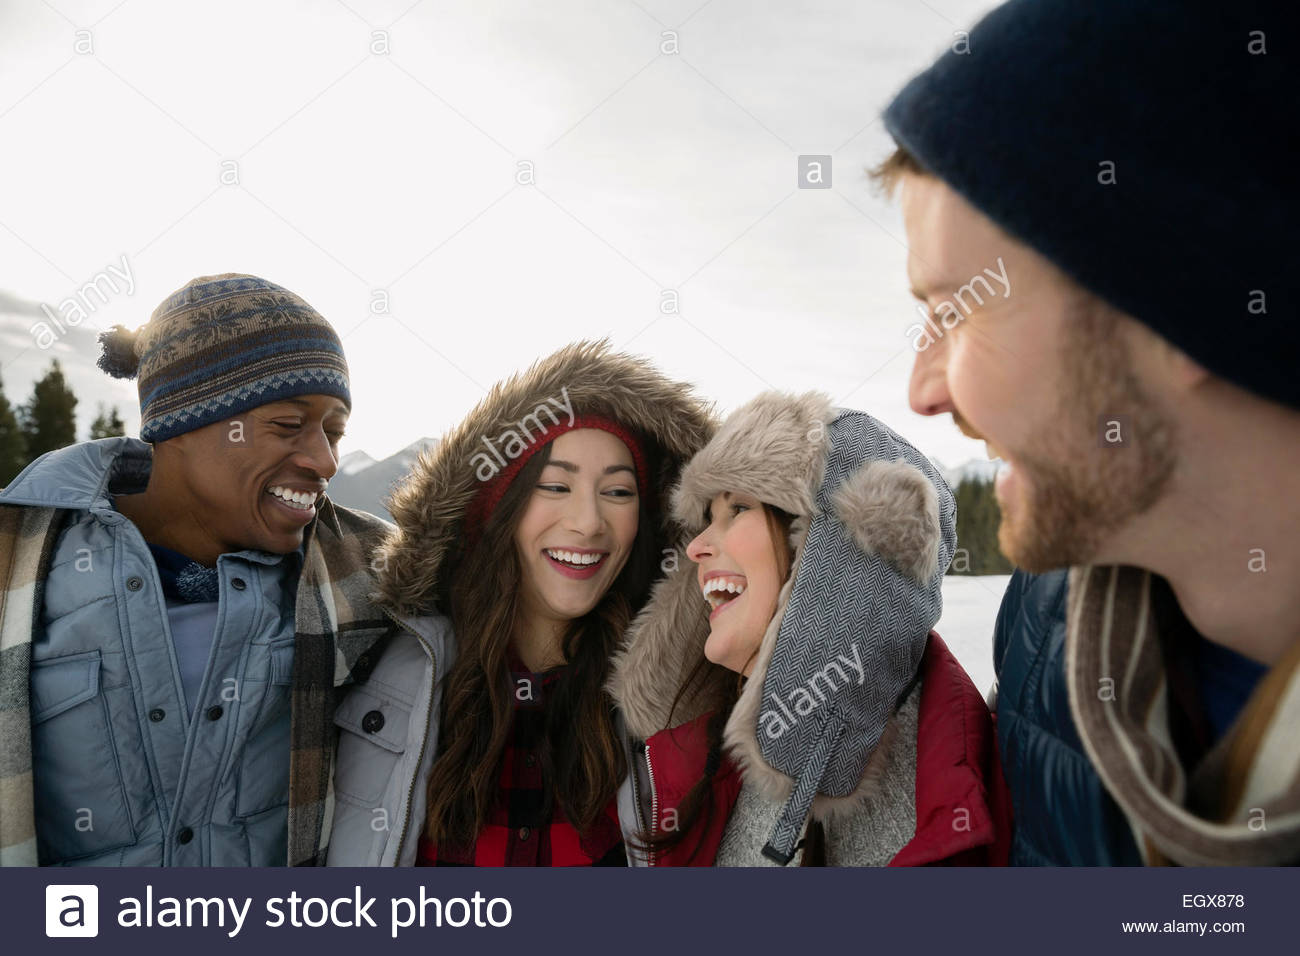 Couples in warm clothing laughing outdoors Stock Photo